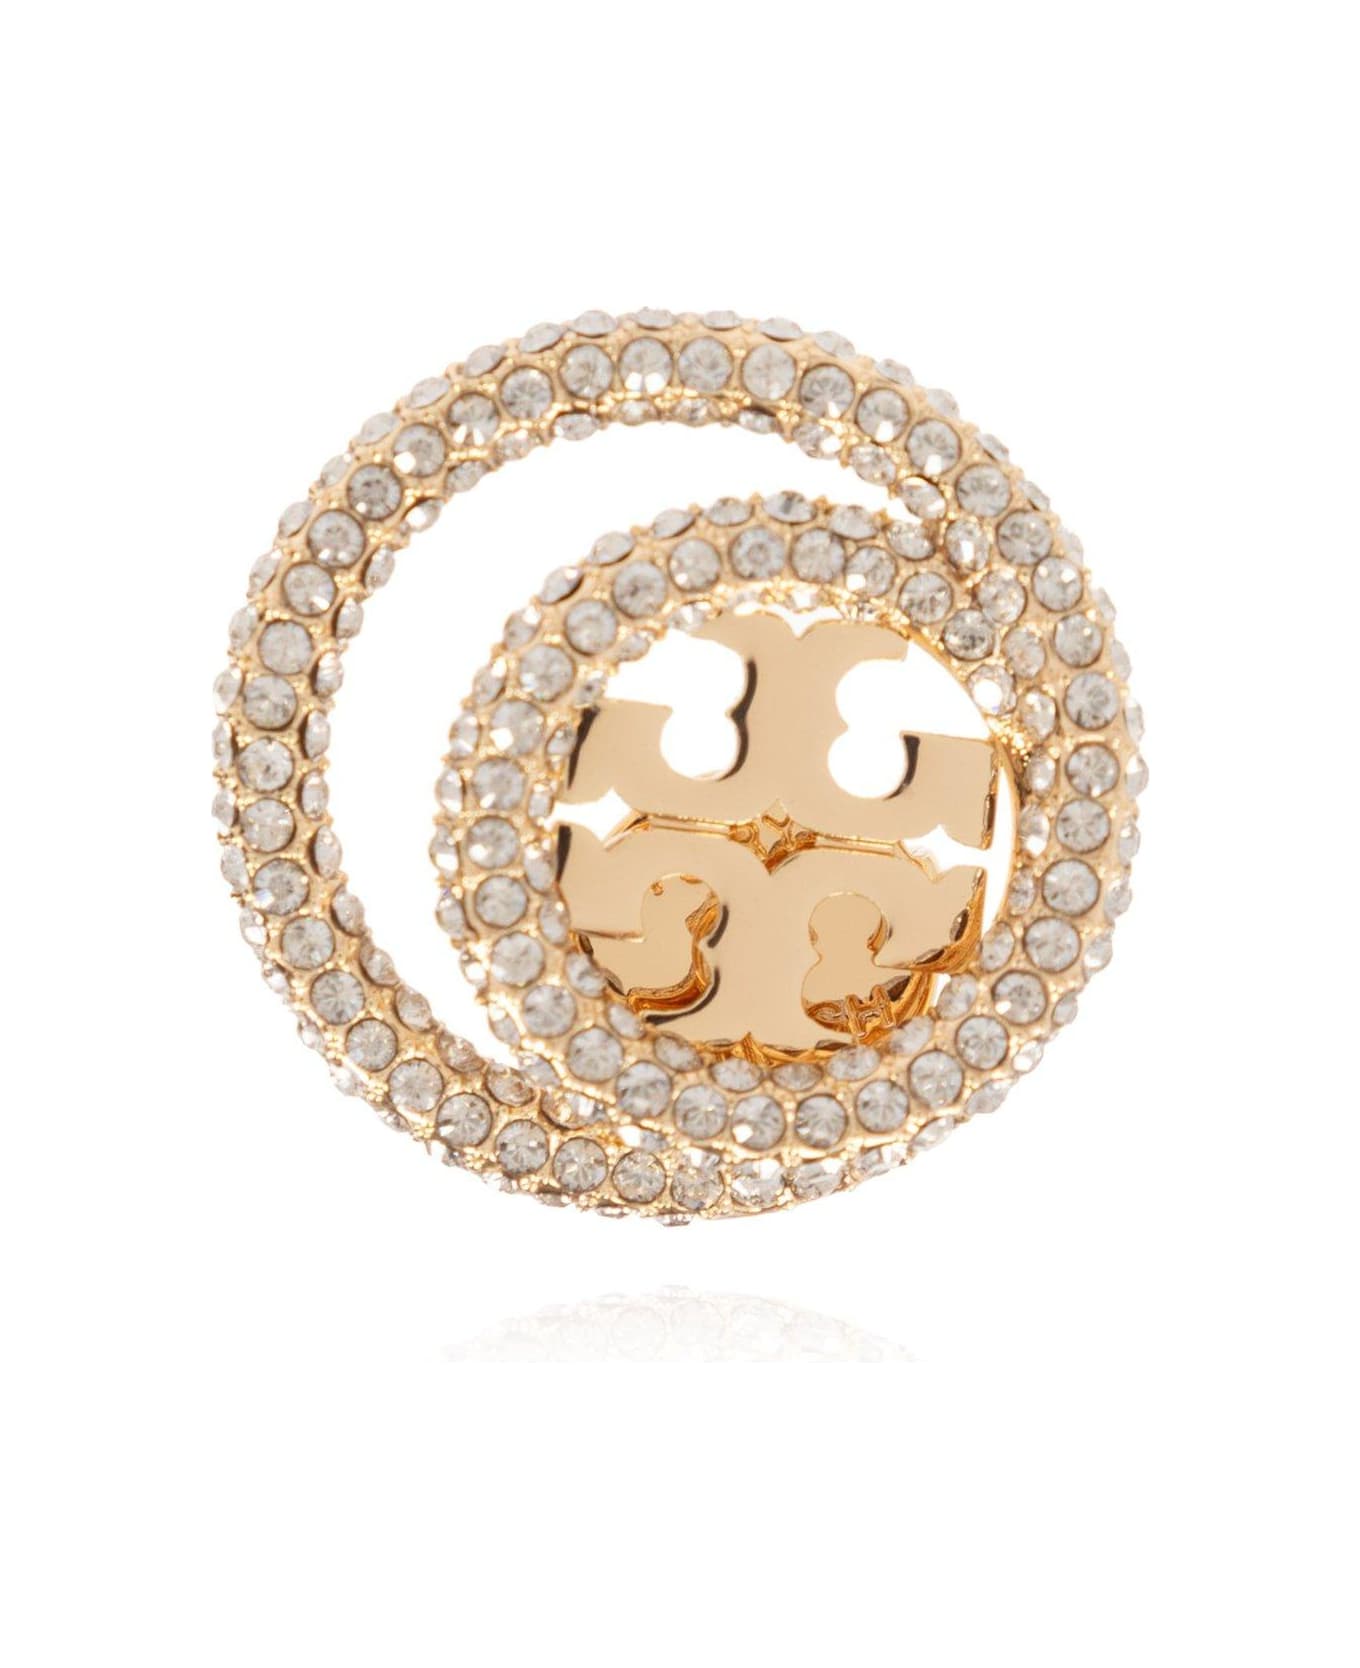 Tory Burch Double-ring Embellished Earrings - Gold/crystal イヤリング